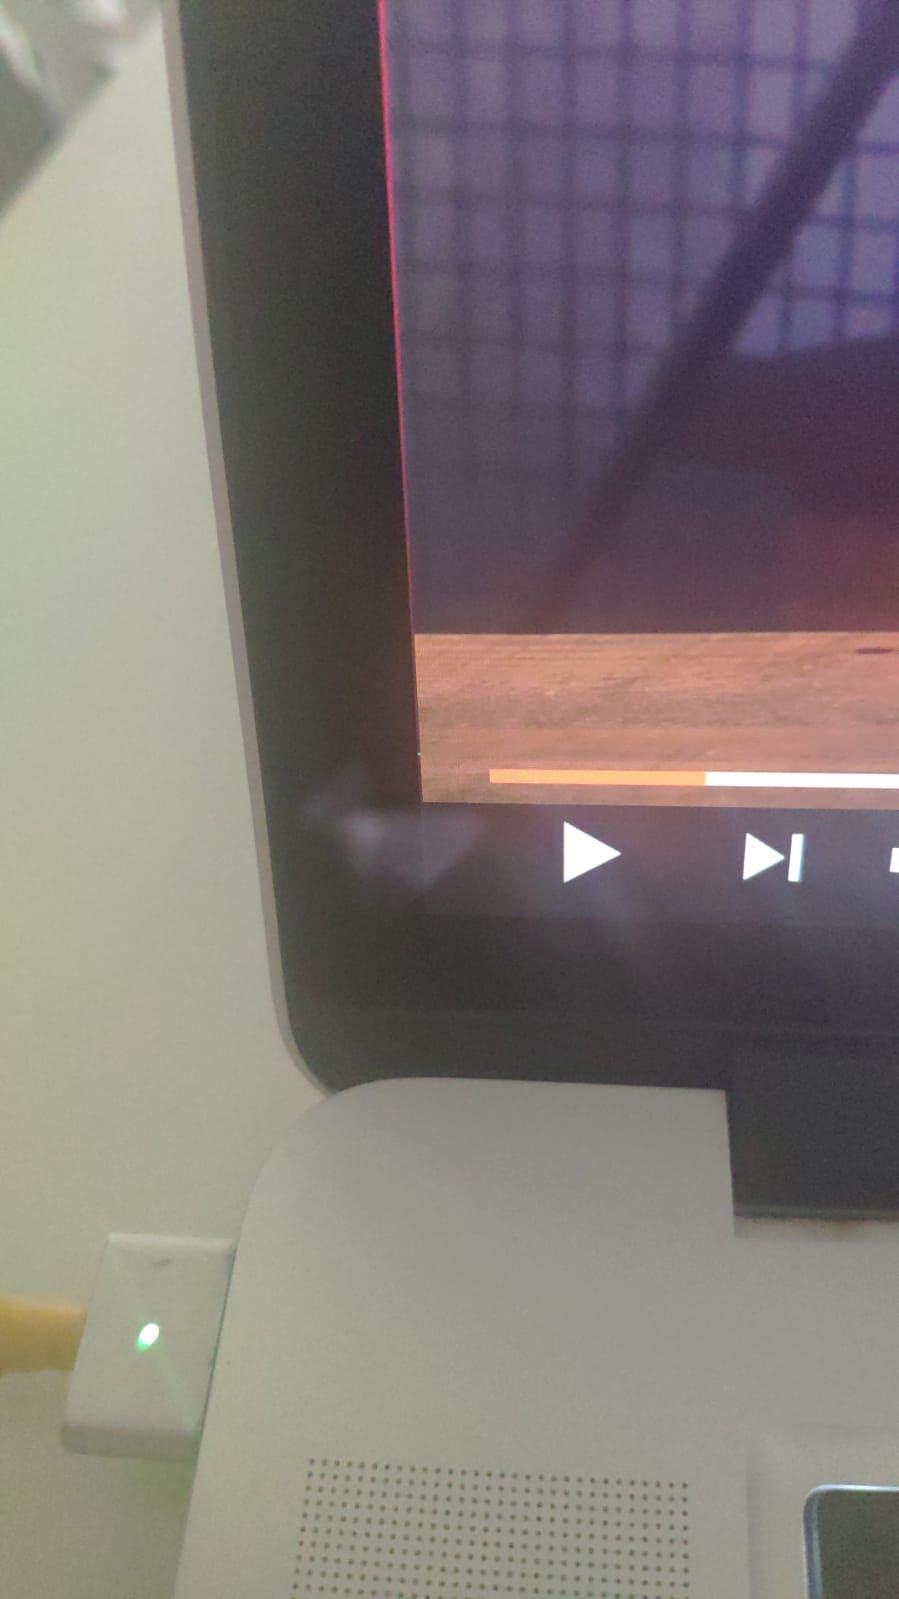 Why is there a white strip at the top of  video in full screen?